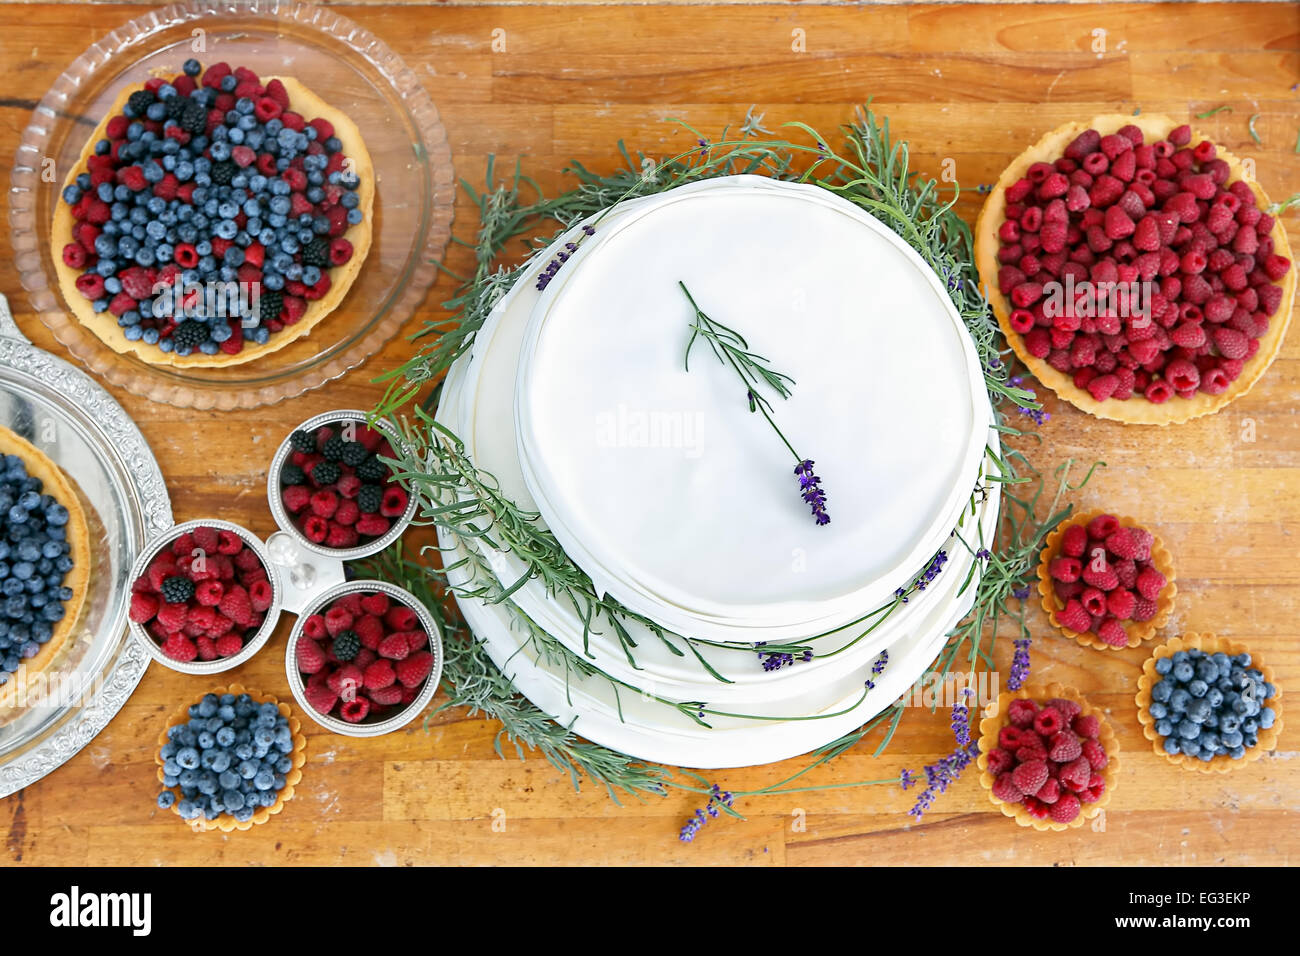 Wedding cake on wooden background with blueberries raspberries and lavender decoration Stock Photo